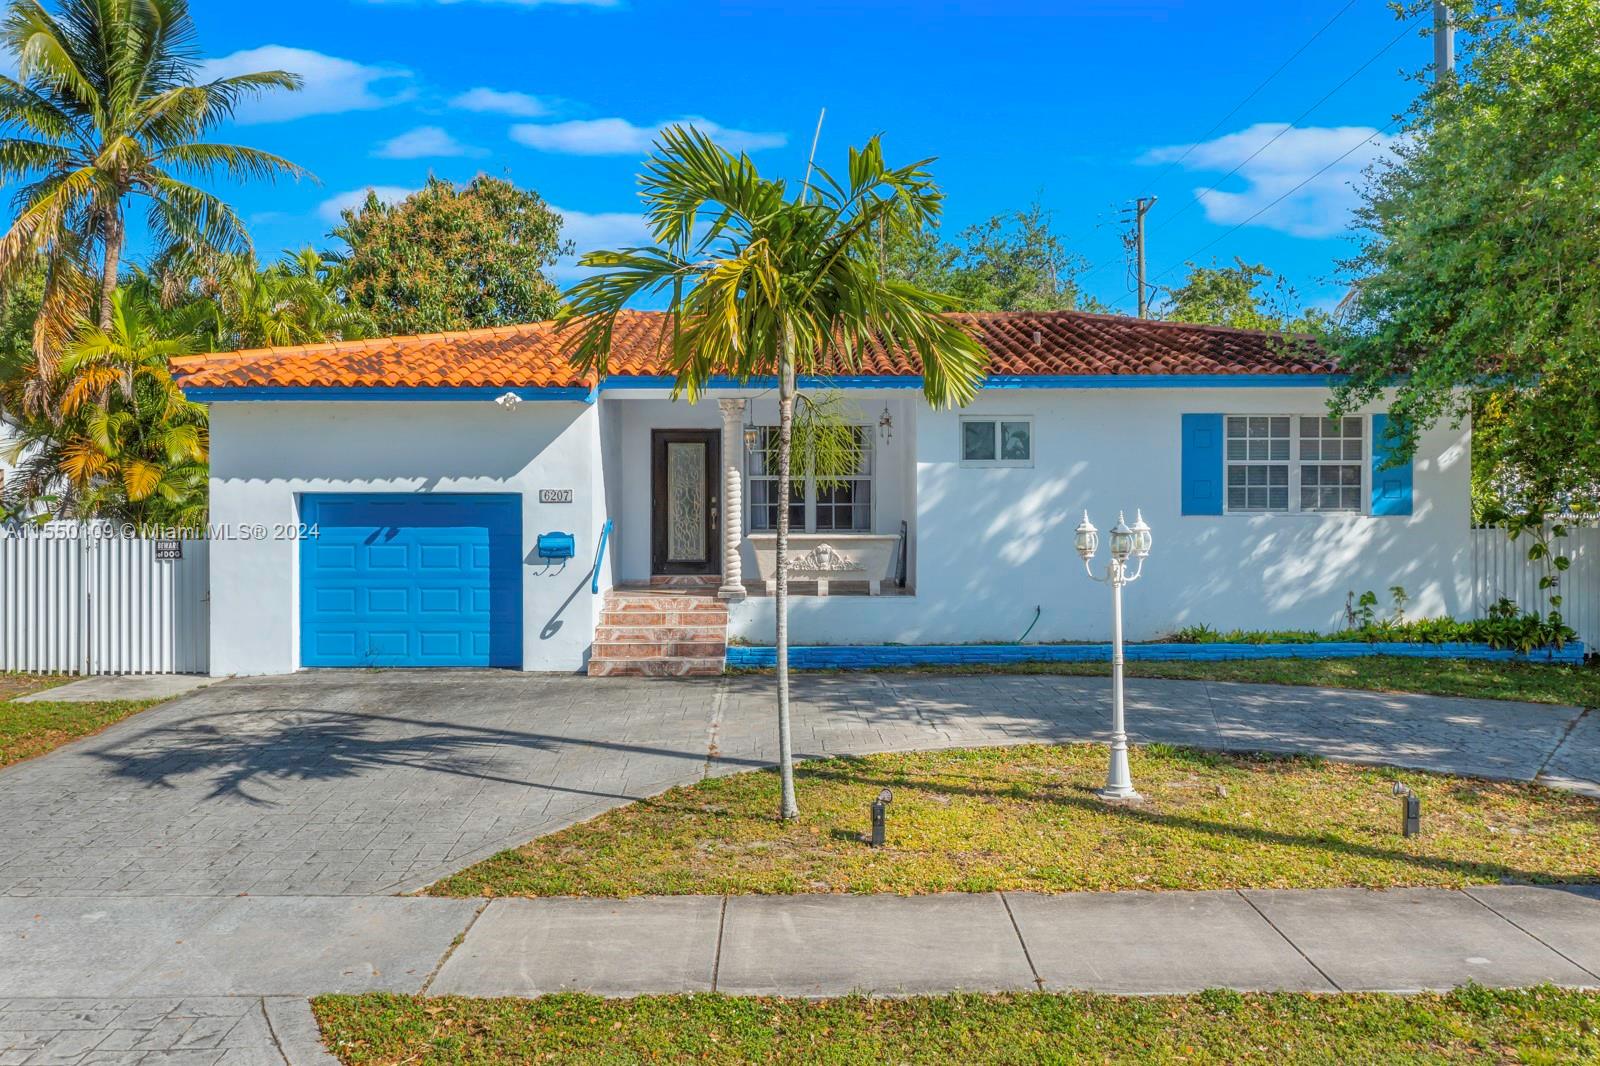 6207 Sw 10th St St, West Miami, Miami-Dade County, Florida - 4 Bedrooms  
2 Bathrooms - 